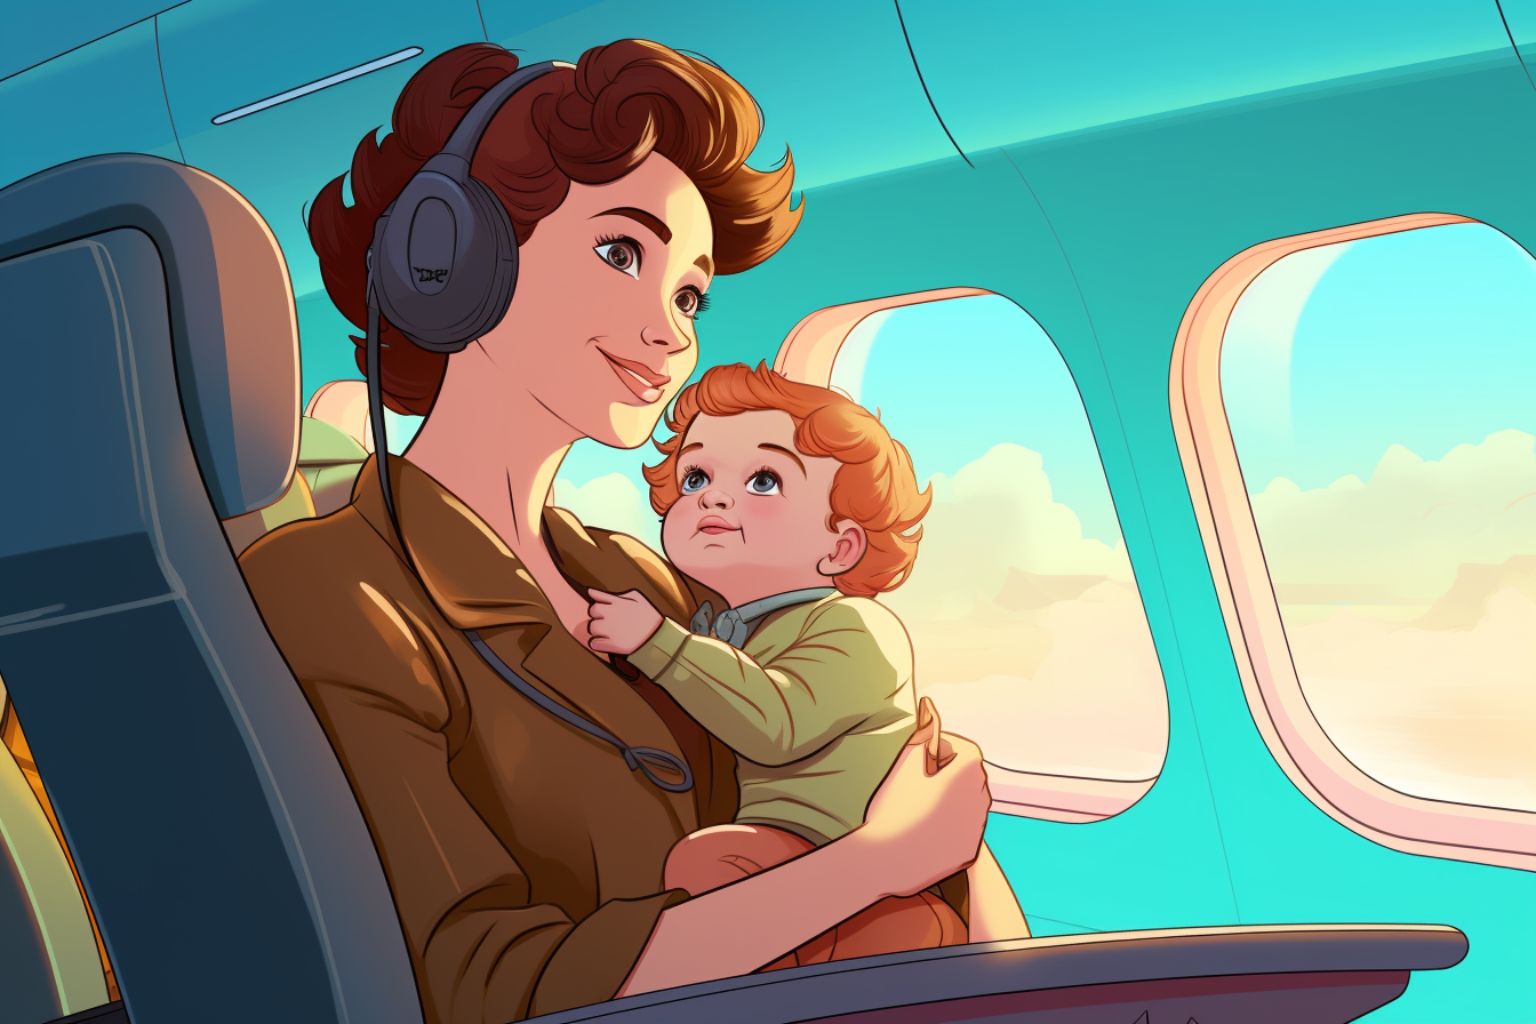 The rights of mothers to nurse their babies on a plane. Breast-feeding advocates weighed in on the issue in the comments section.